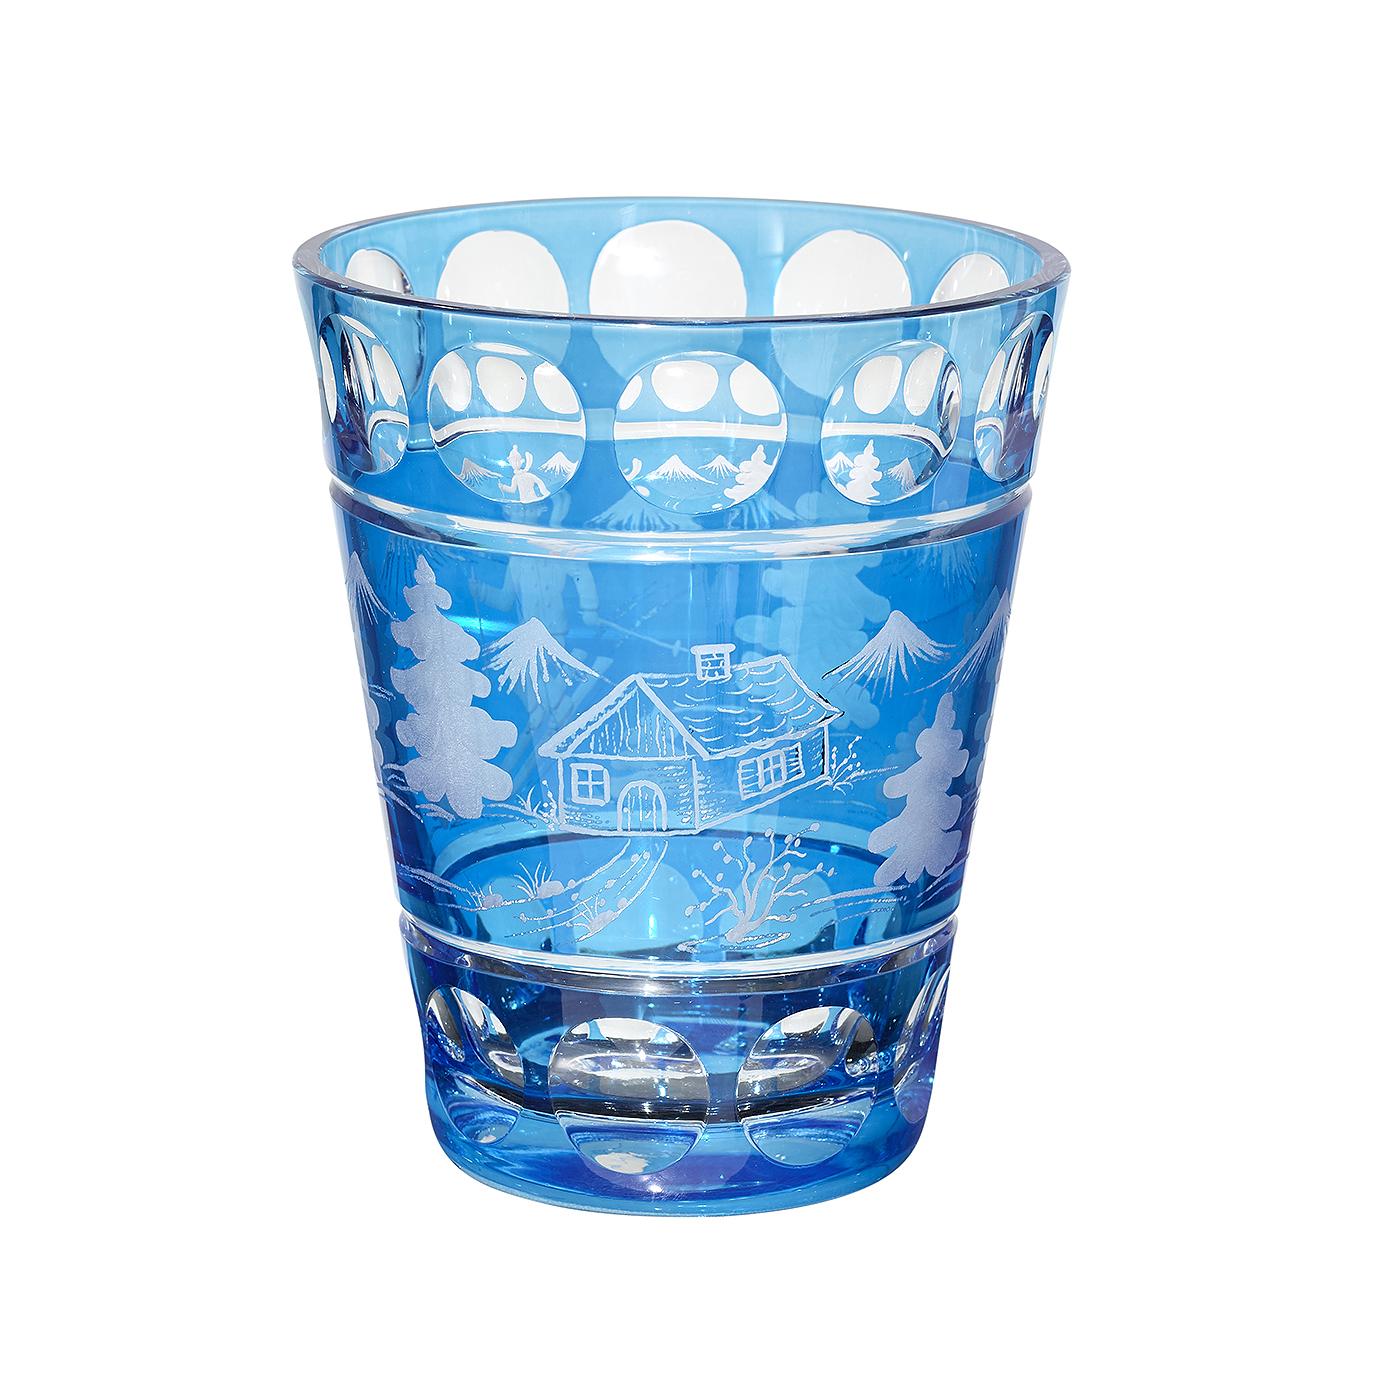 Handblown glass vase in blue crystal with hand-edged skiier decor. The decor is a skiier with trees, mountains and a hut engraved all around. Completely handblown and hand-engraved in Bavaria Germany. The glass here shown comes in blue and is